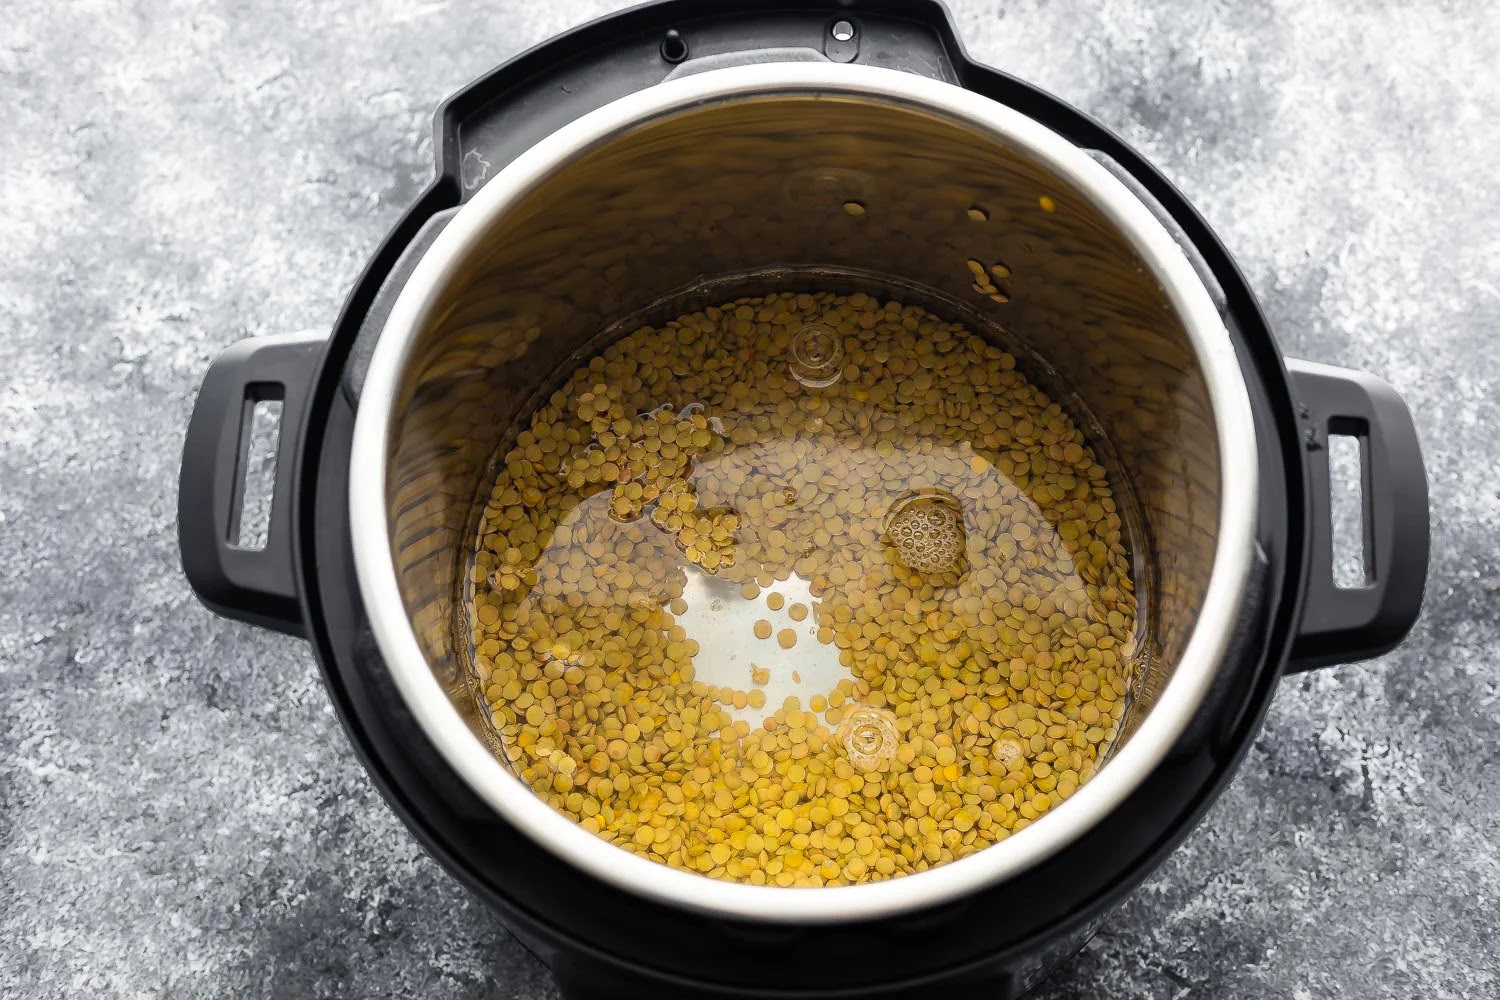 How To Cook Lentils In Electric Pressure Cooker